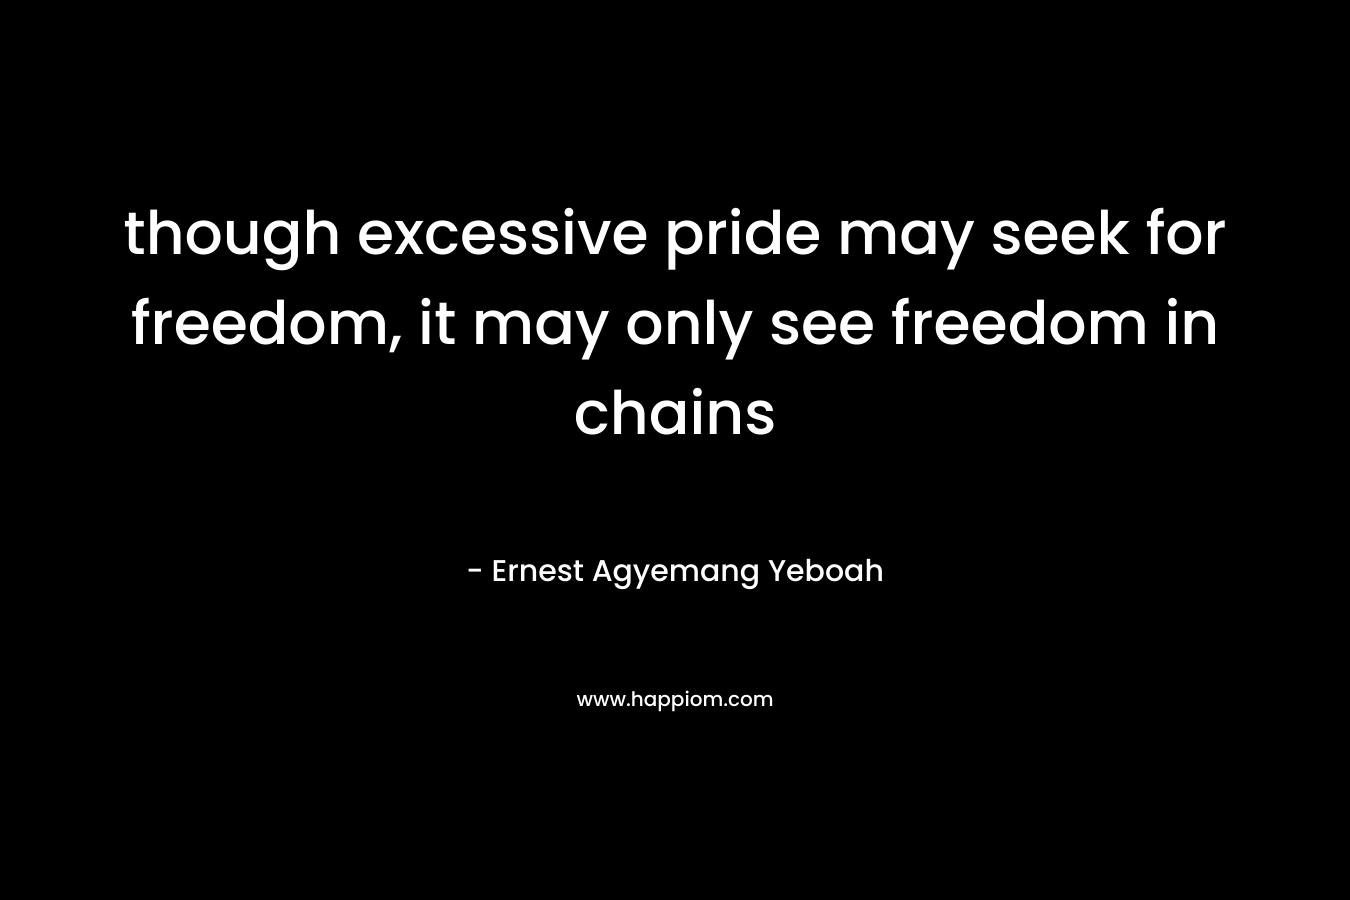 though excessive pride may seek for freedom, it may only see freedom in chains